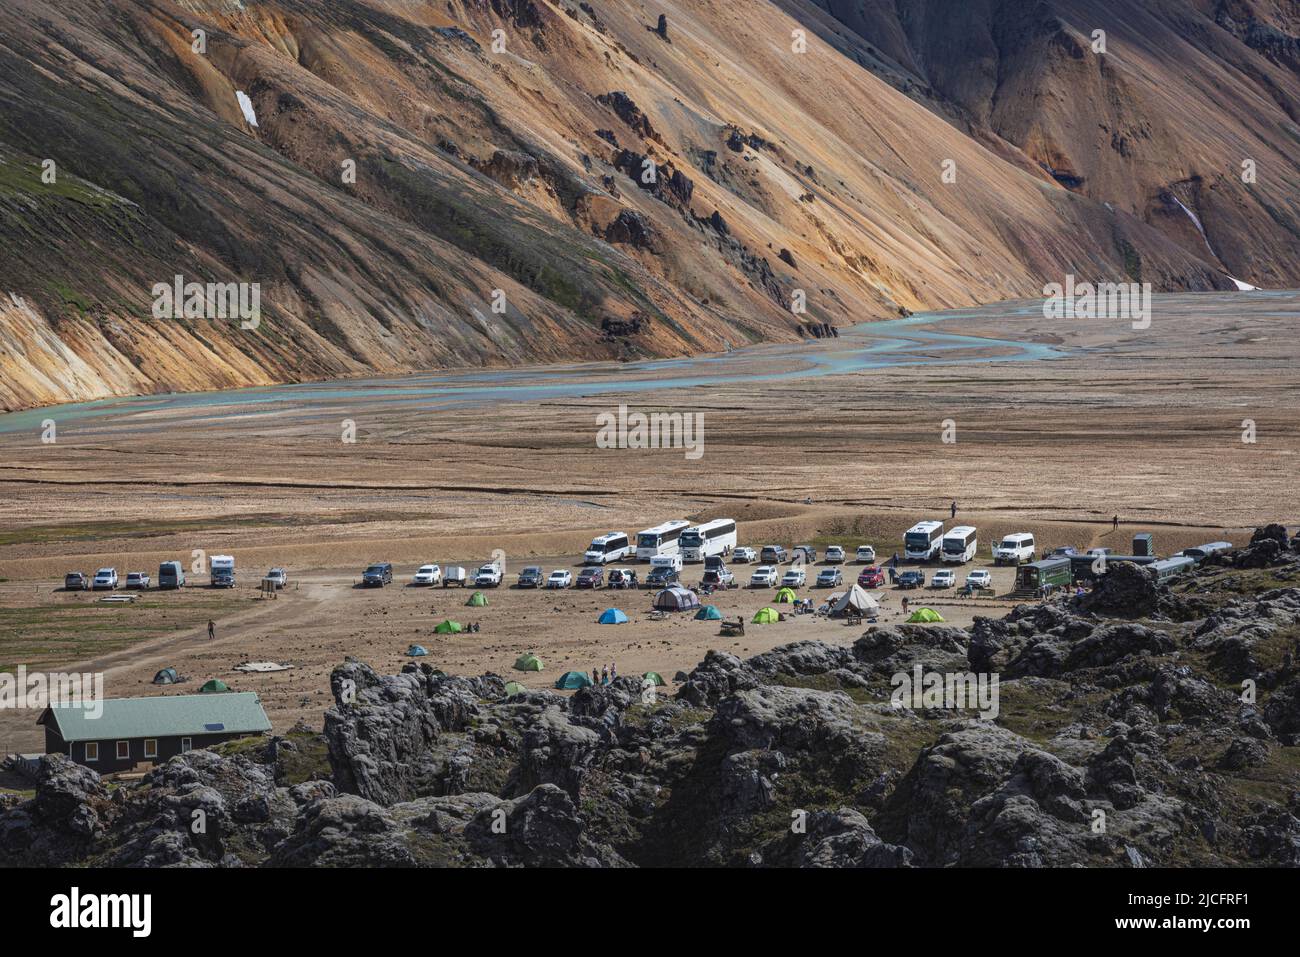 Laugavegur hiking trail is the most famous multi-day trekking tour in Iceland. Landscape shot from the area around Landmannalaugar, starting point of the long-distance hiking trail in the highlands of Iceland. Camping site. Stock Photo